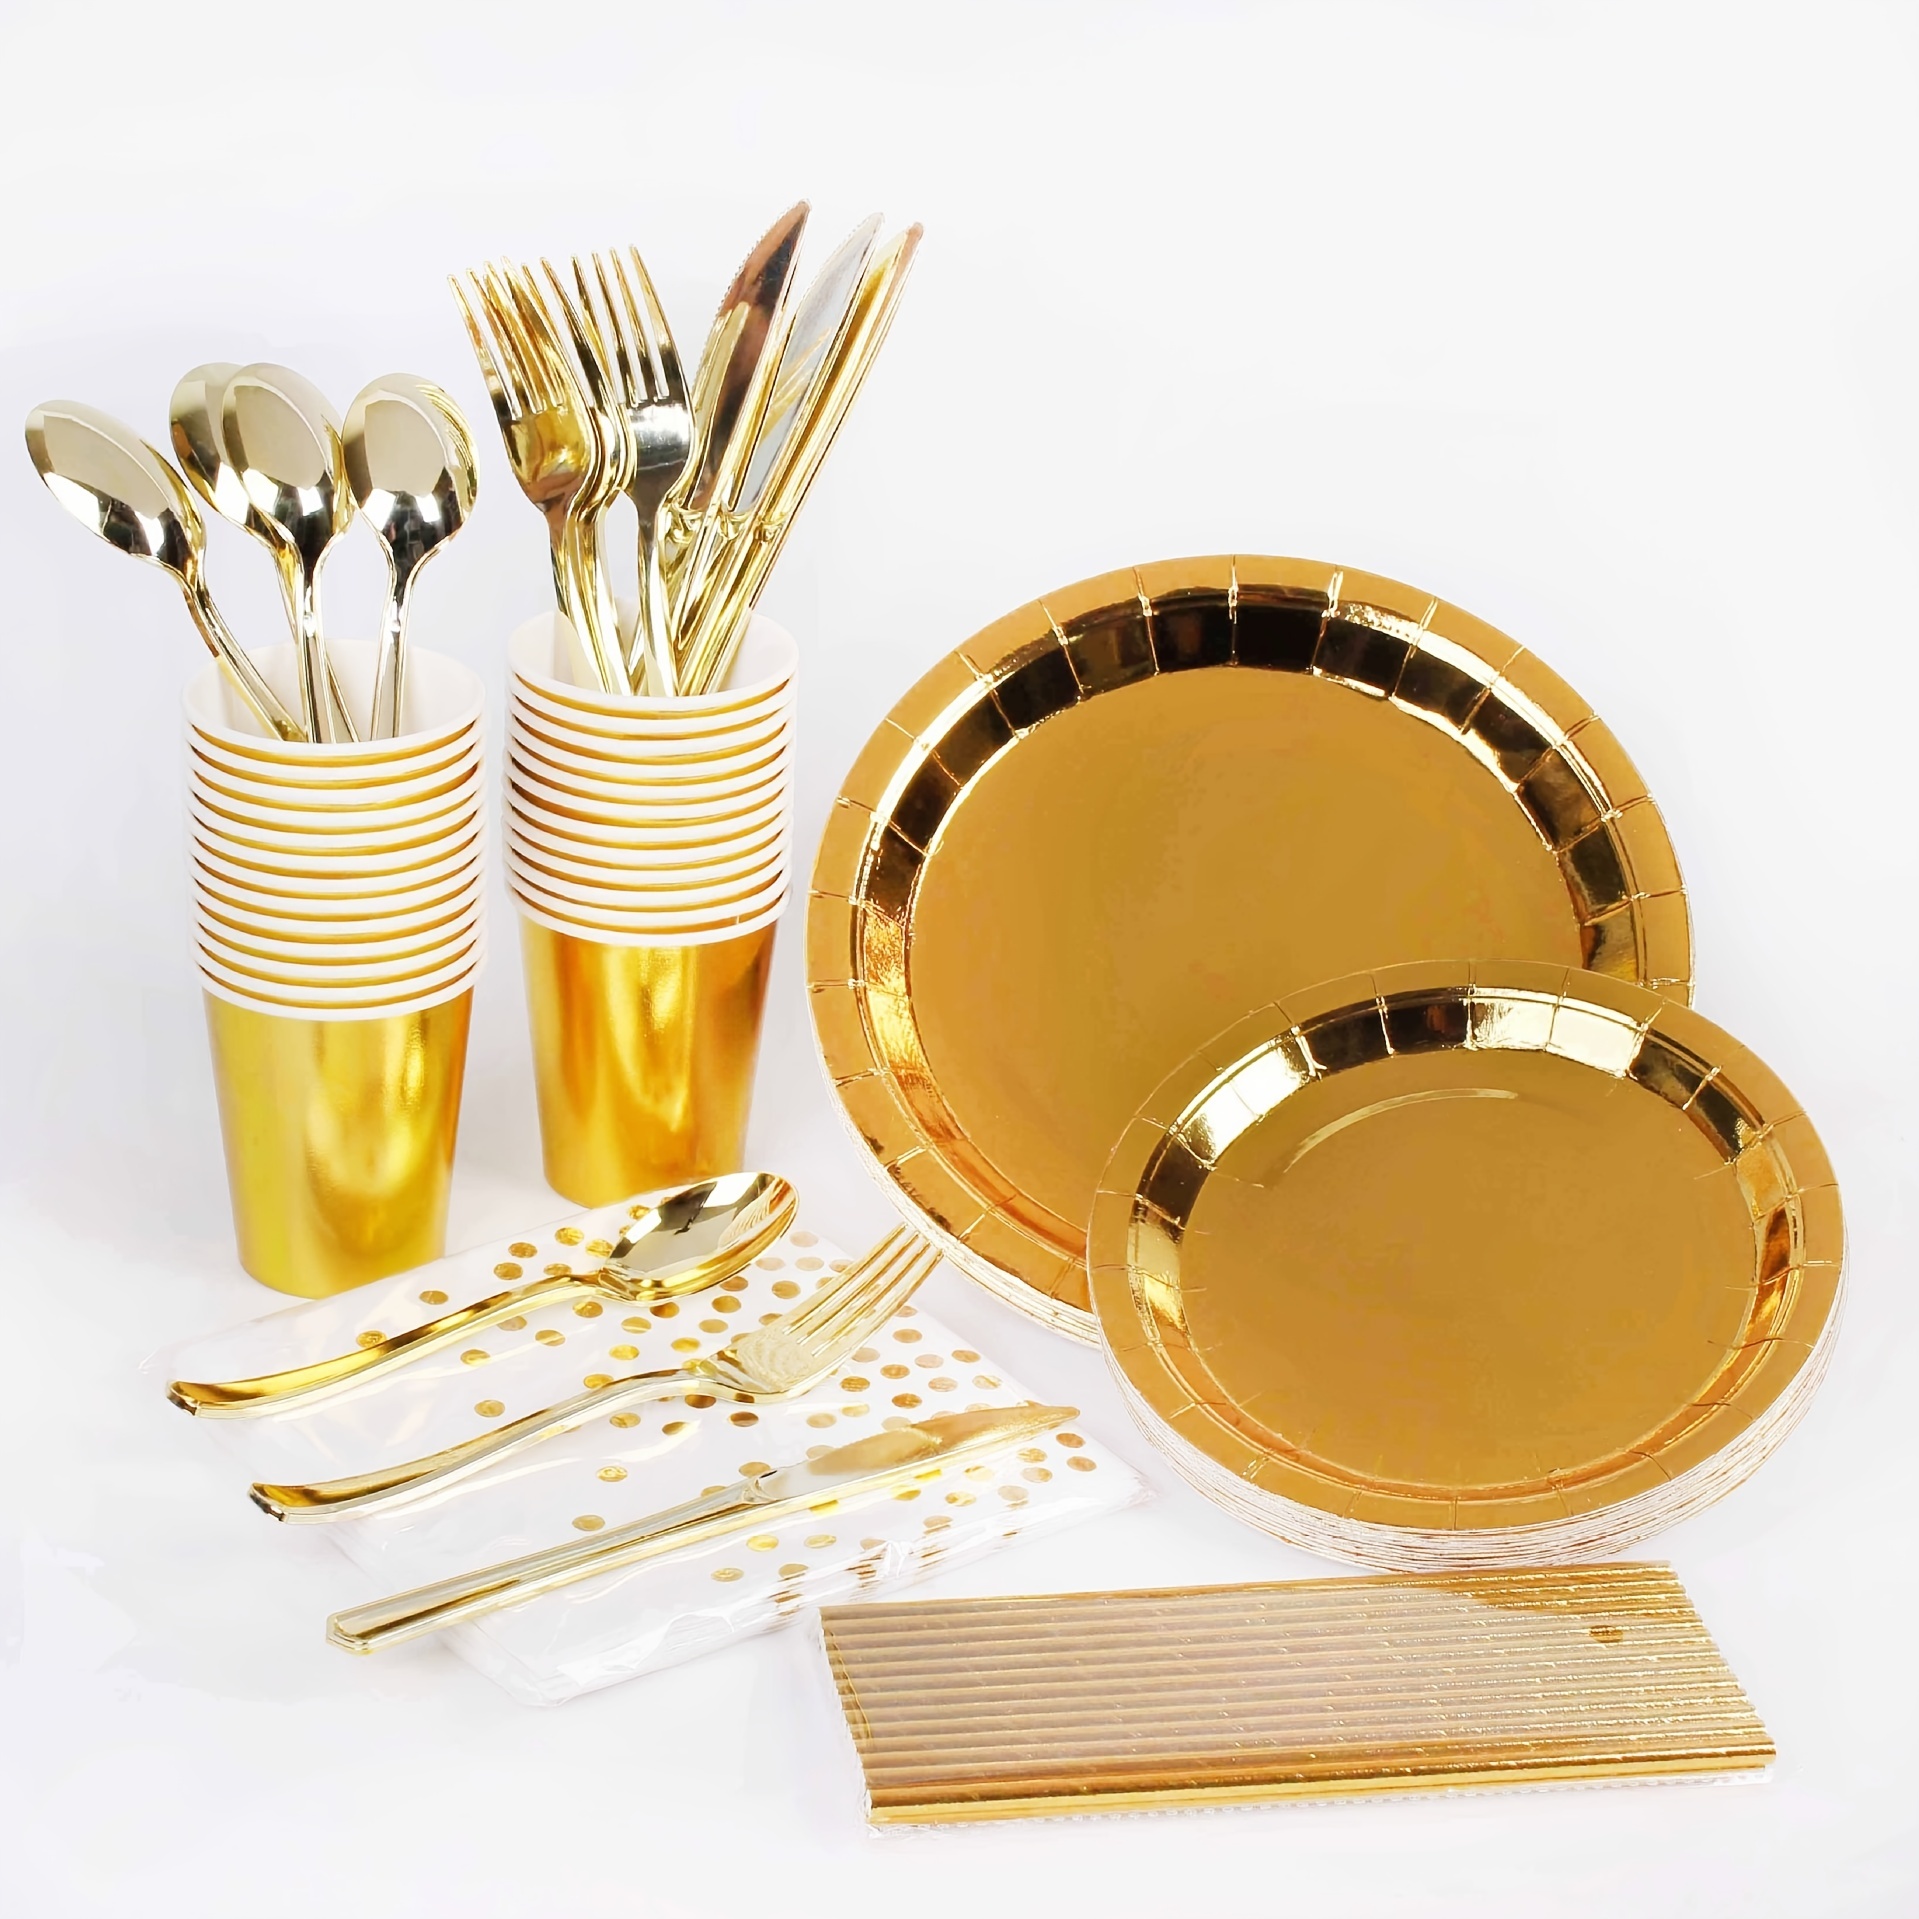 

16pcs, Solid Golden Birthday Party Supplies, Gold Paper Plates Napkins Cups Silverware Serves 10 Sets For Wedding, Bridal Shower, Engagement,birthday Parties, Disposable Paper Plate Easter Gift